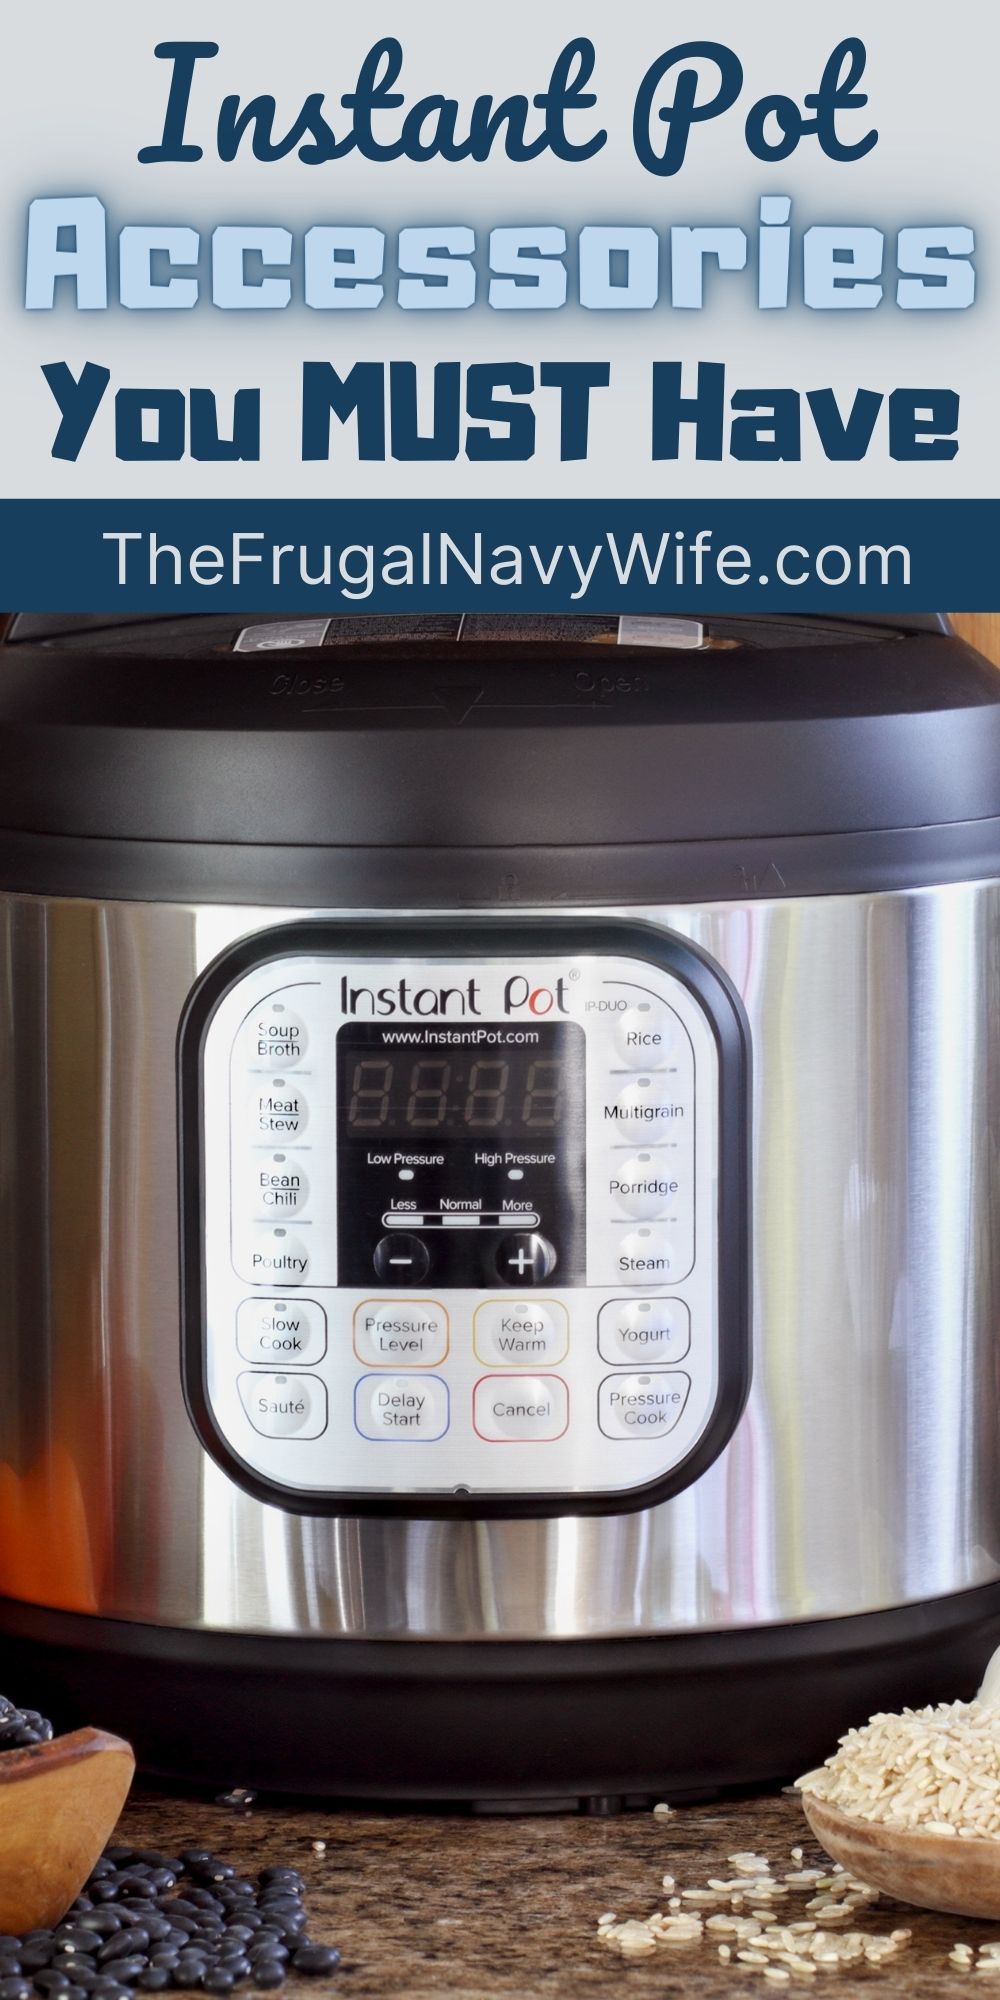 https://www.thefrugalnavywife.com/wp-content/uploads/2022/01/Instant-Pot-Accessories-You-Must-Have-1.jpg